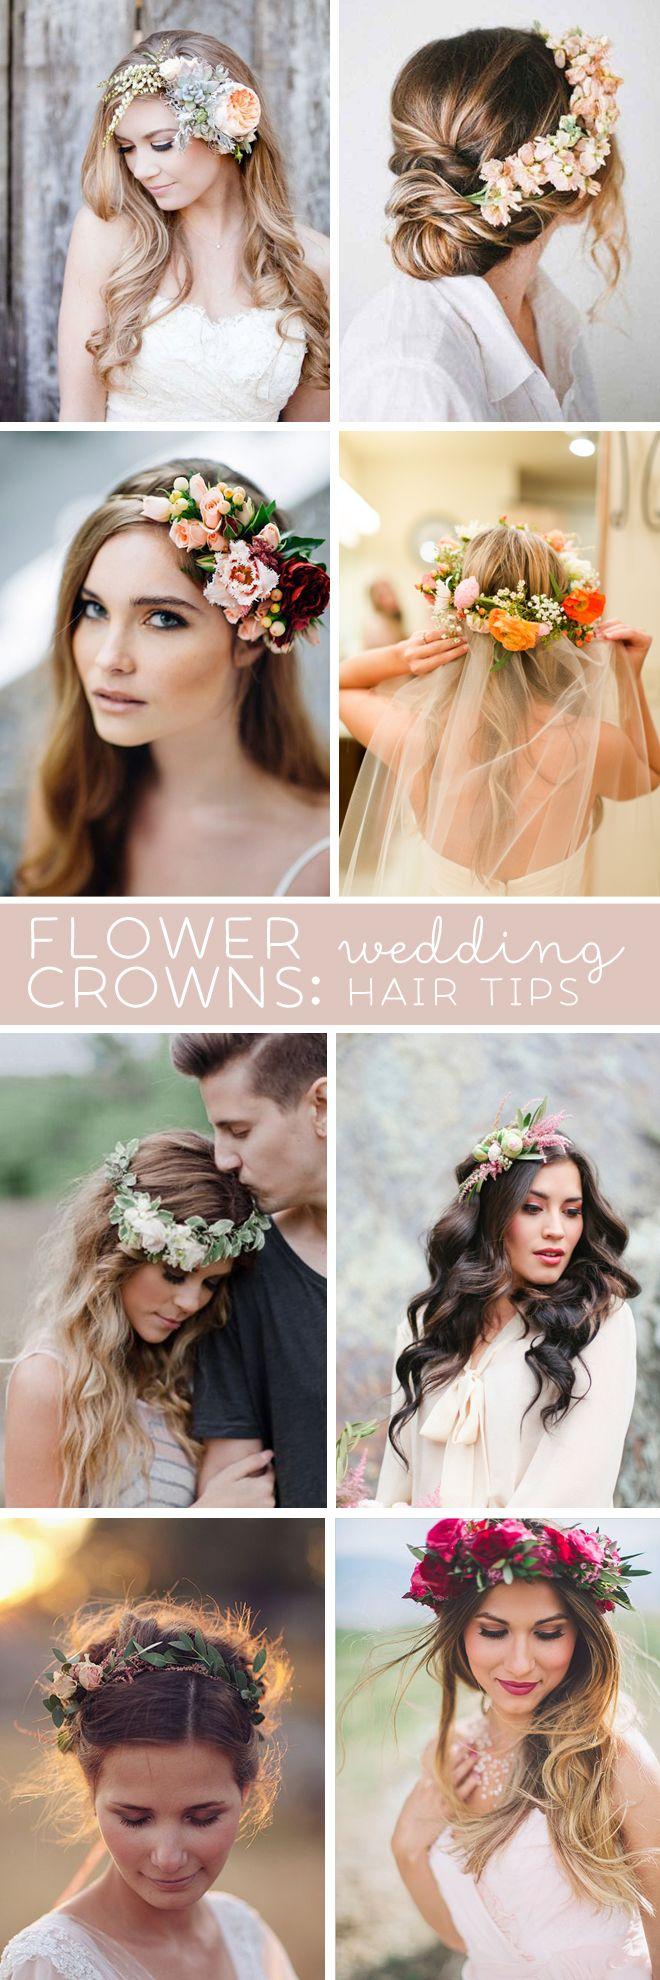 Wedding - Awesome Wedding Hair Tips For Wearing Flower Crowns!